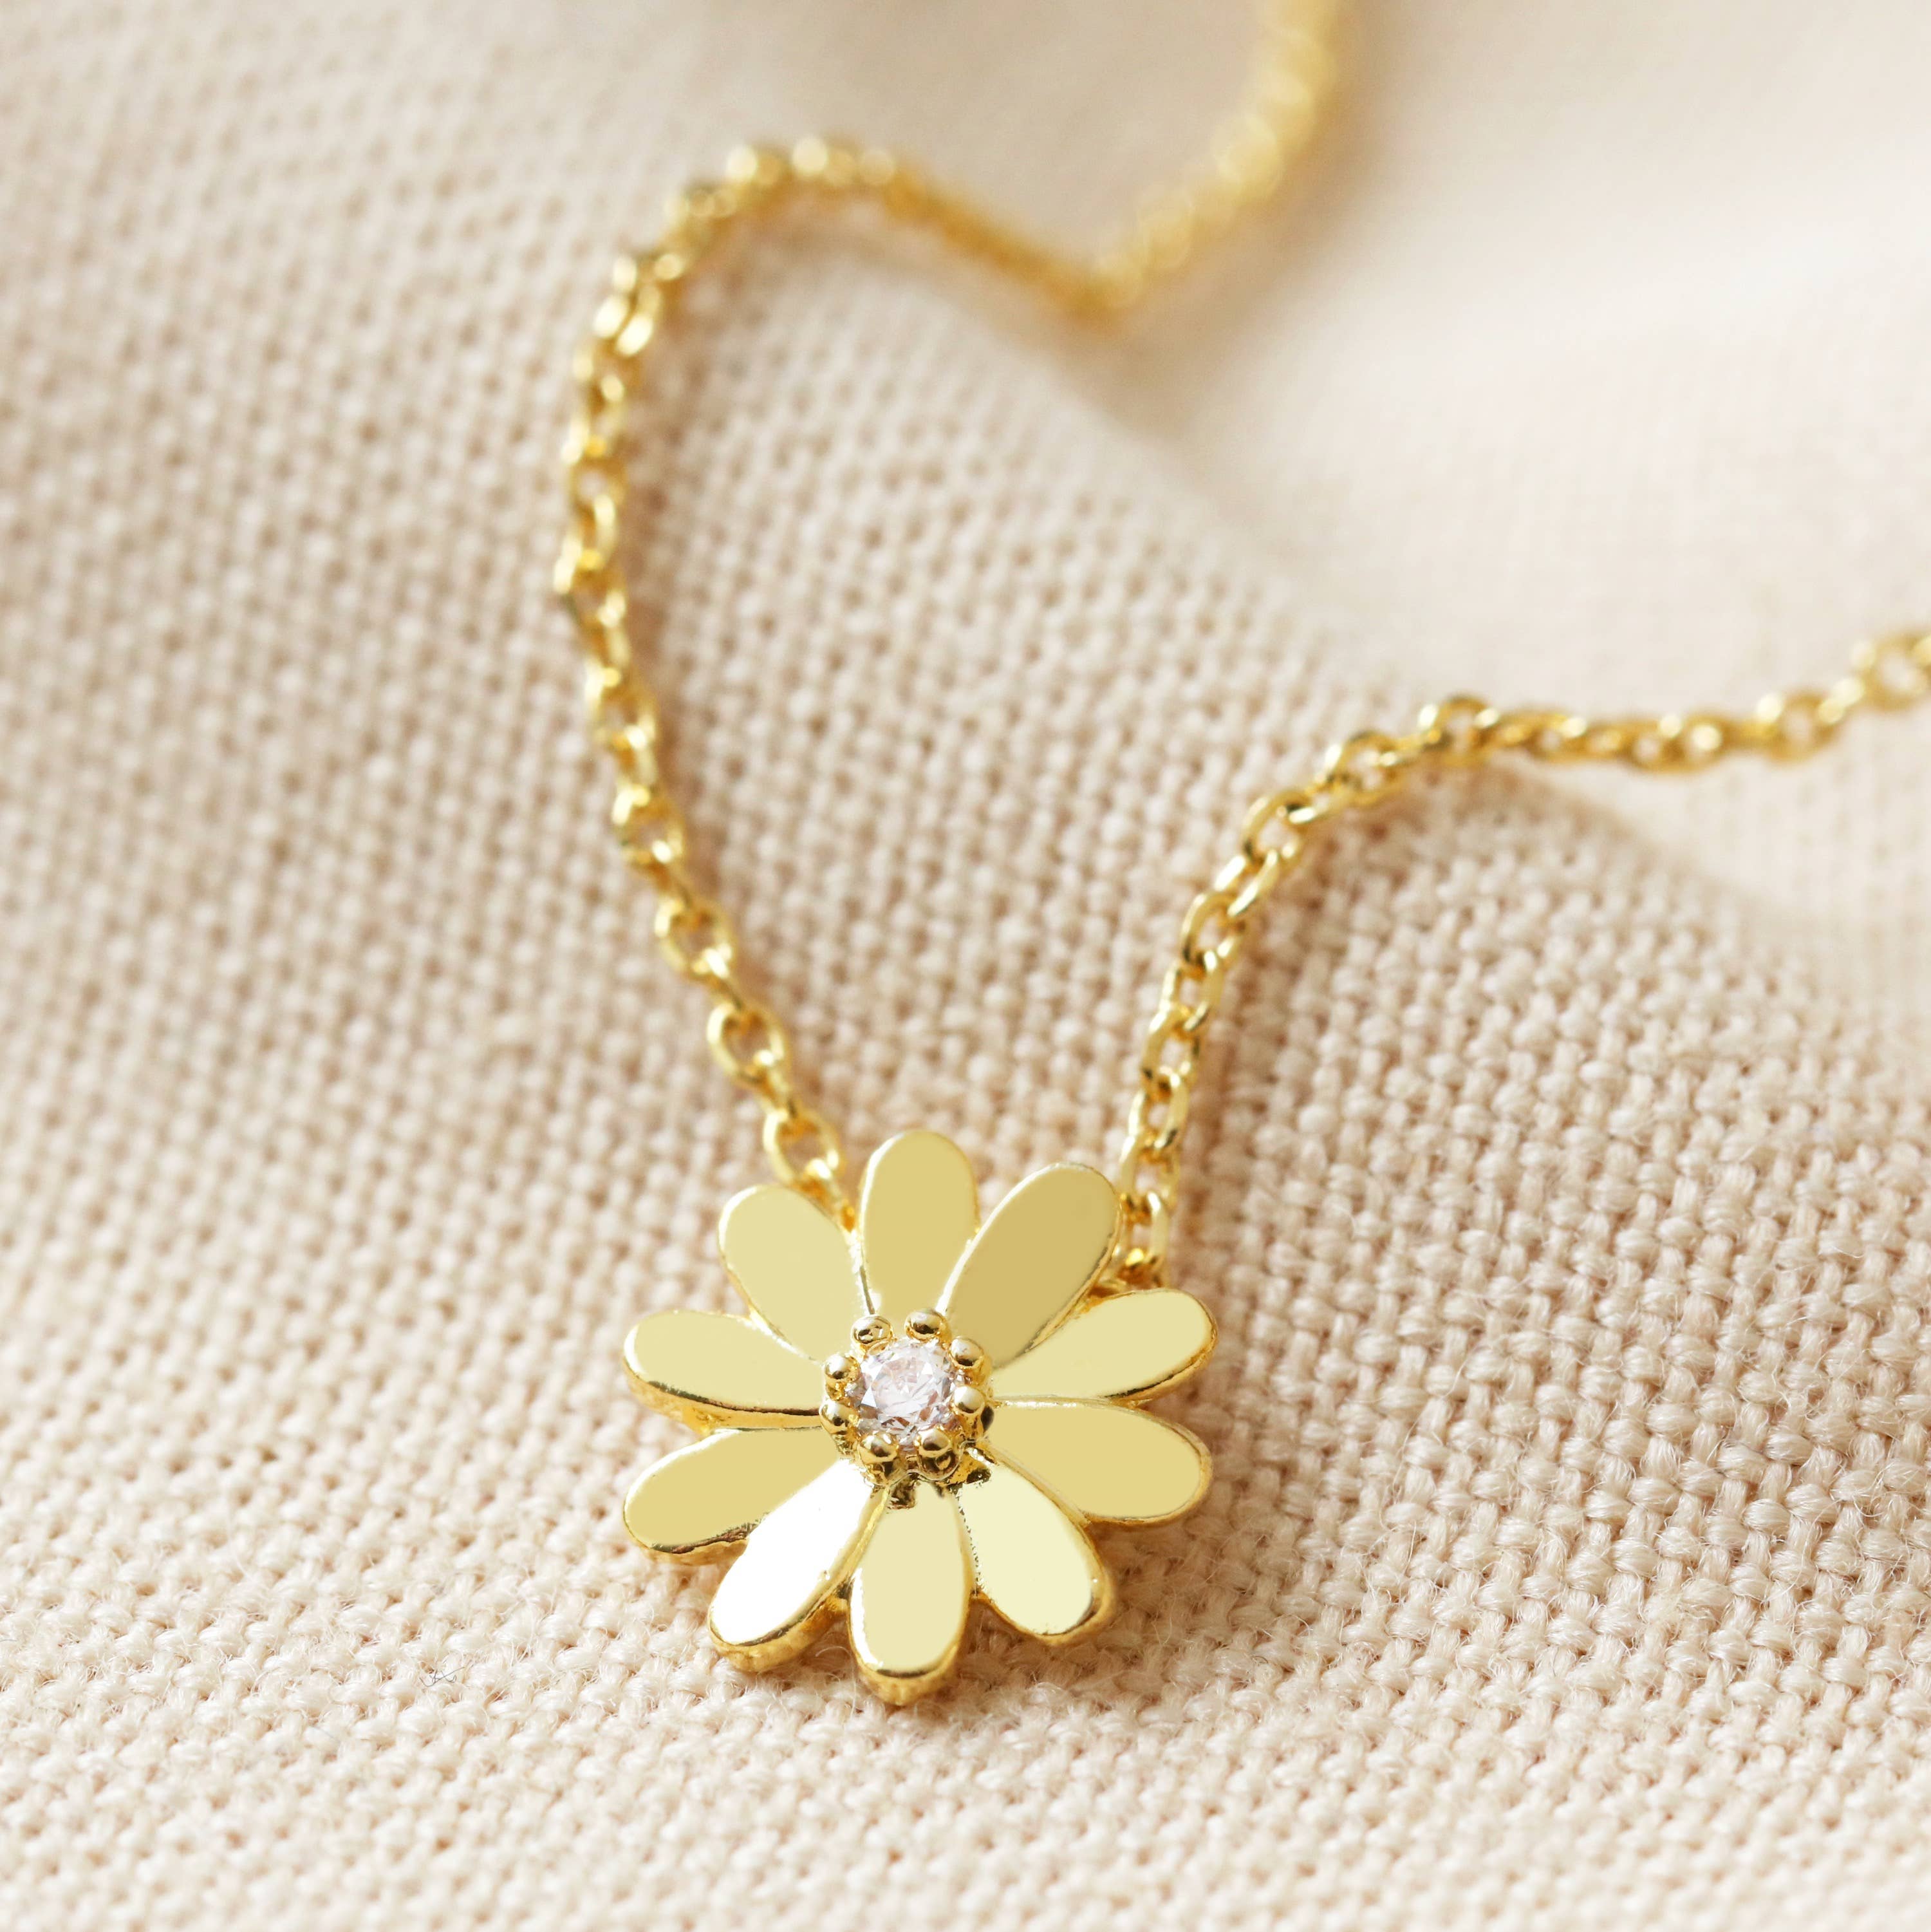 Petit Moments daisy pendant charm necklace in gold